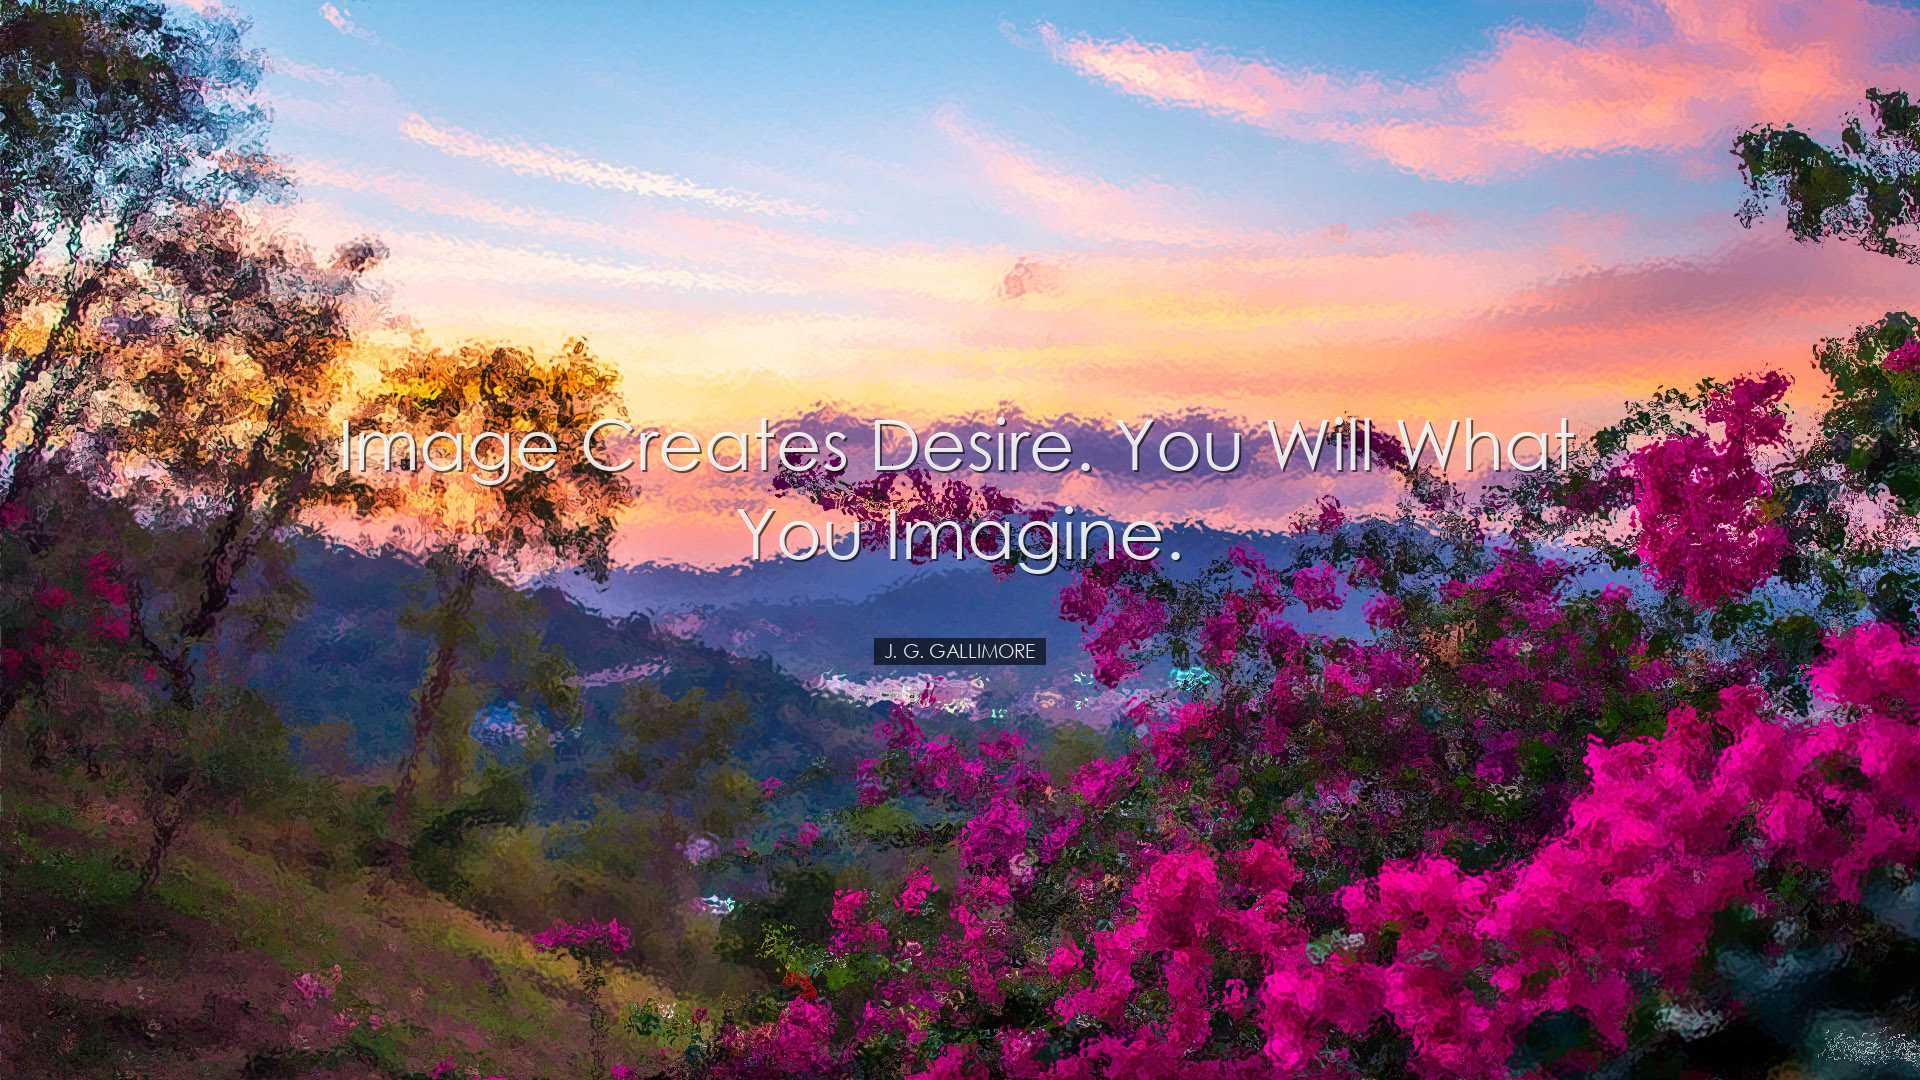 Image creates desire. You will what you imagine. - J. G. Gallimore